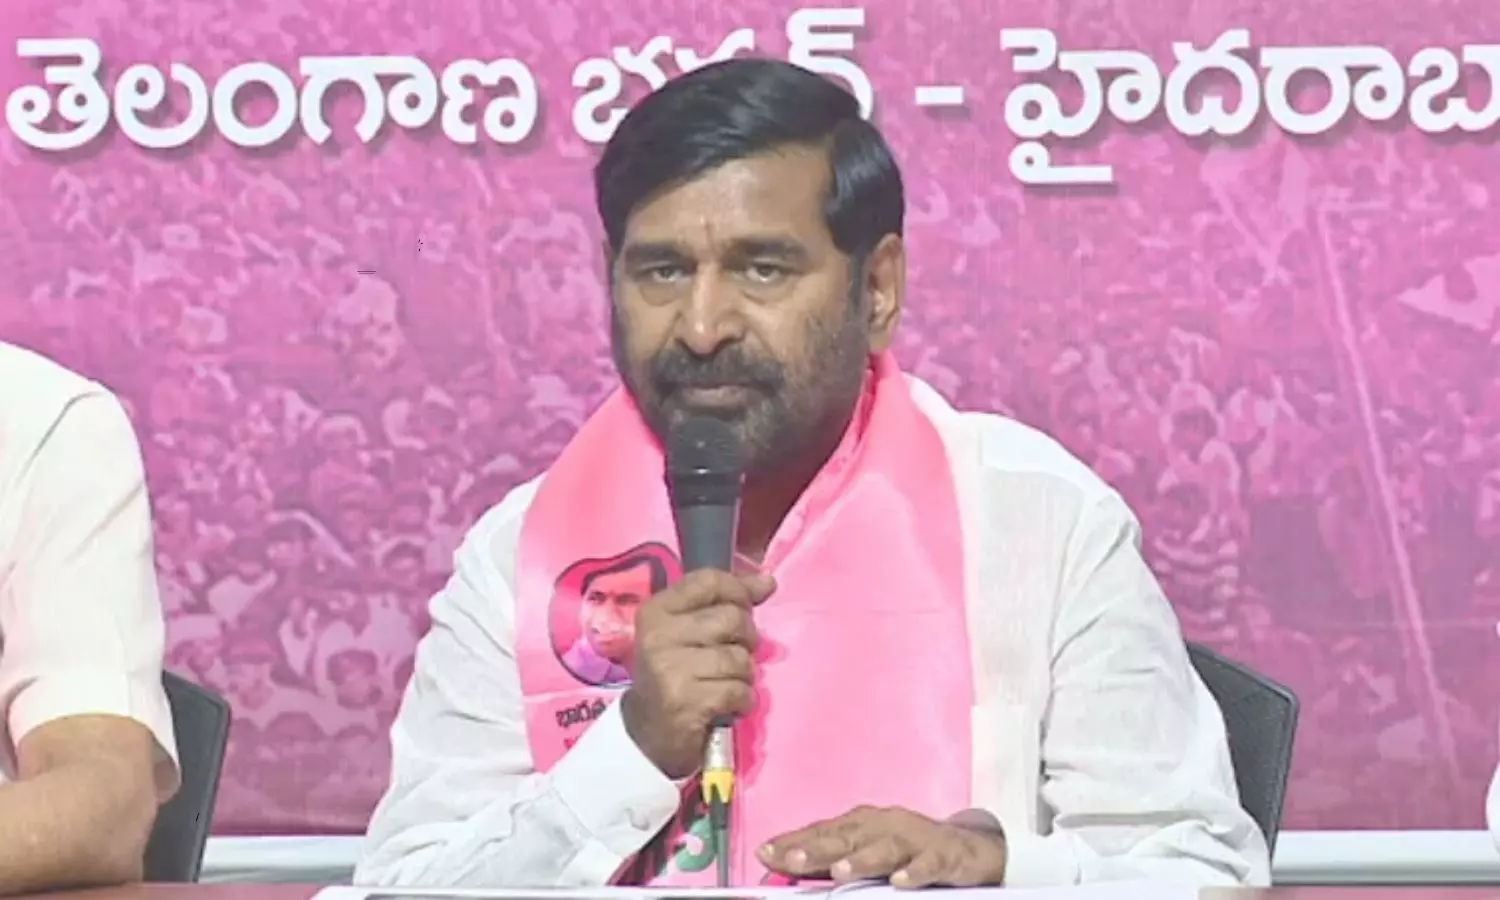 The collection of electricity bills across the state has gone into private hands says Jagadish Reddy